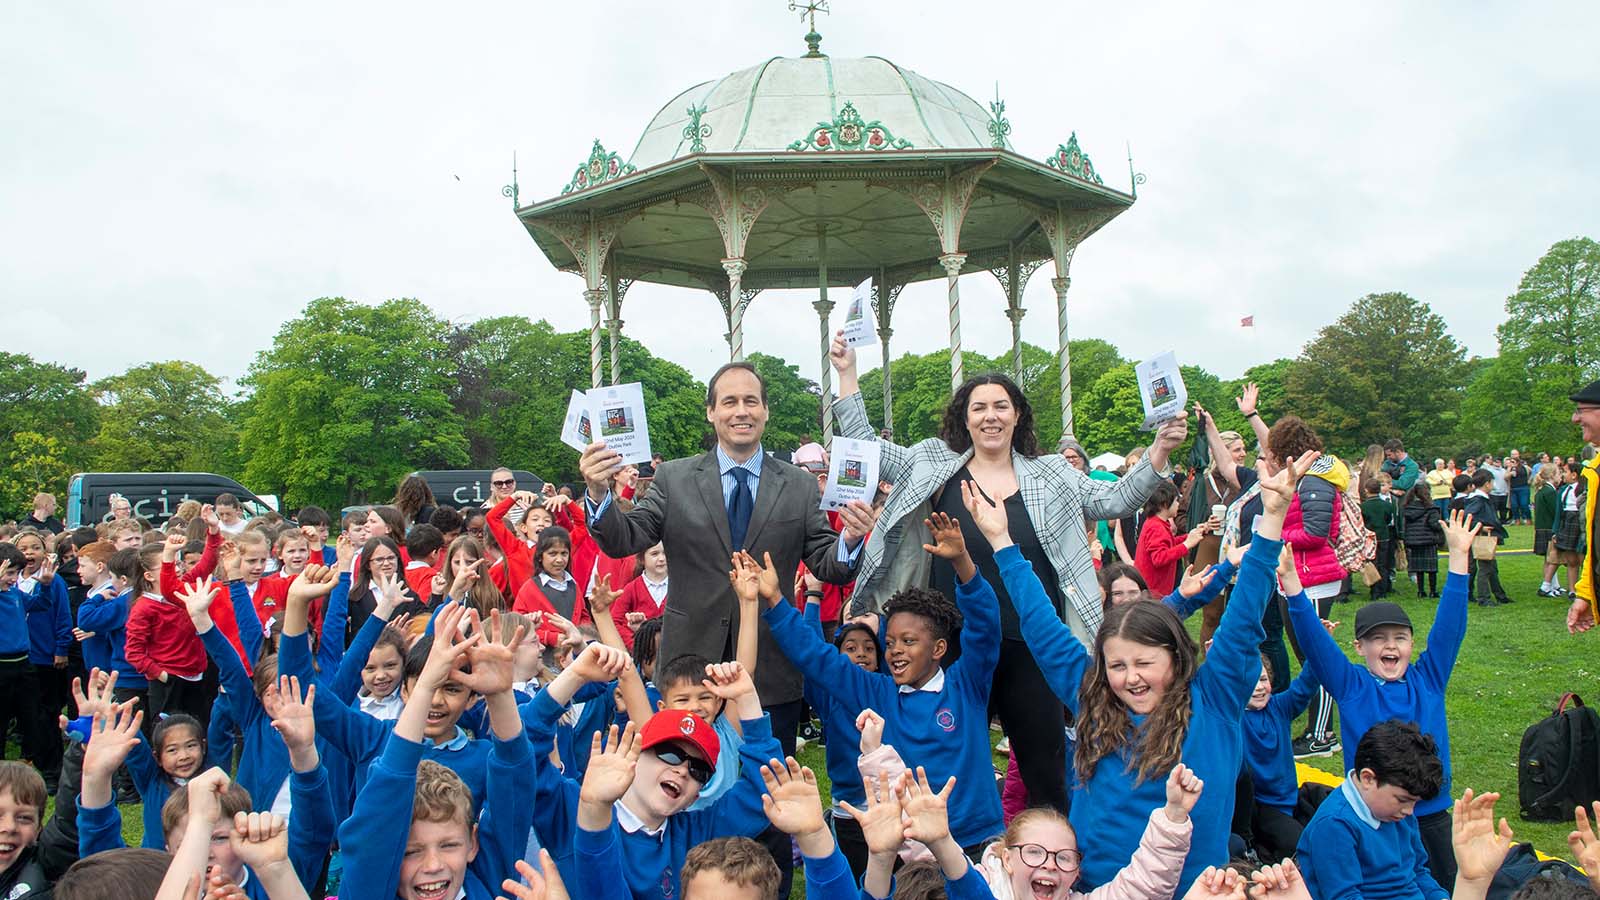 Primary school pupils in bright blue and red school uniforms crowd together in a park, their arms raised in celebration, in the centre, two adults holding the programmes for The Big Sing, in the background, the gazebo where the band performed